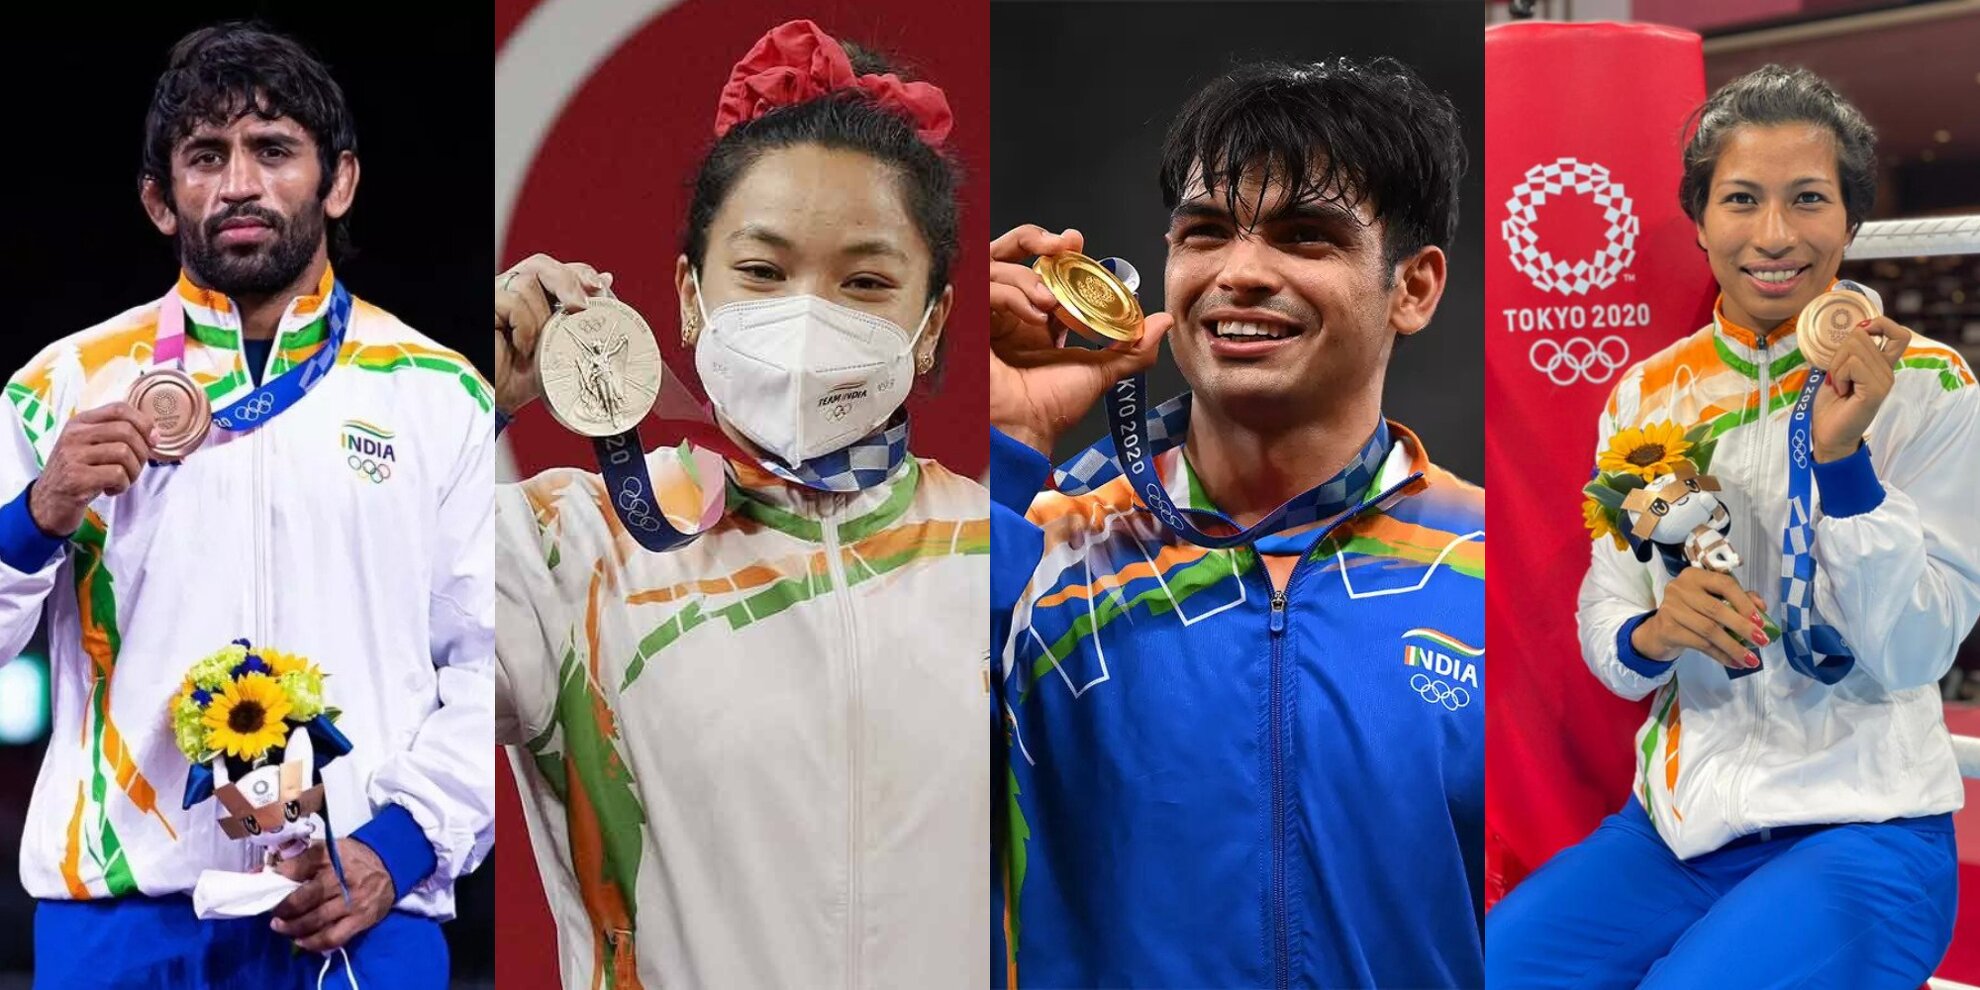 Top Indian athletes 2021